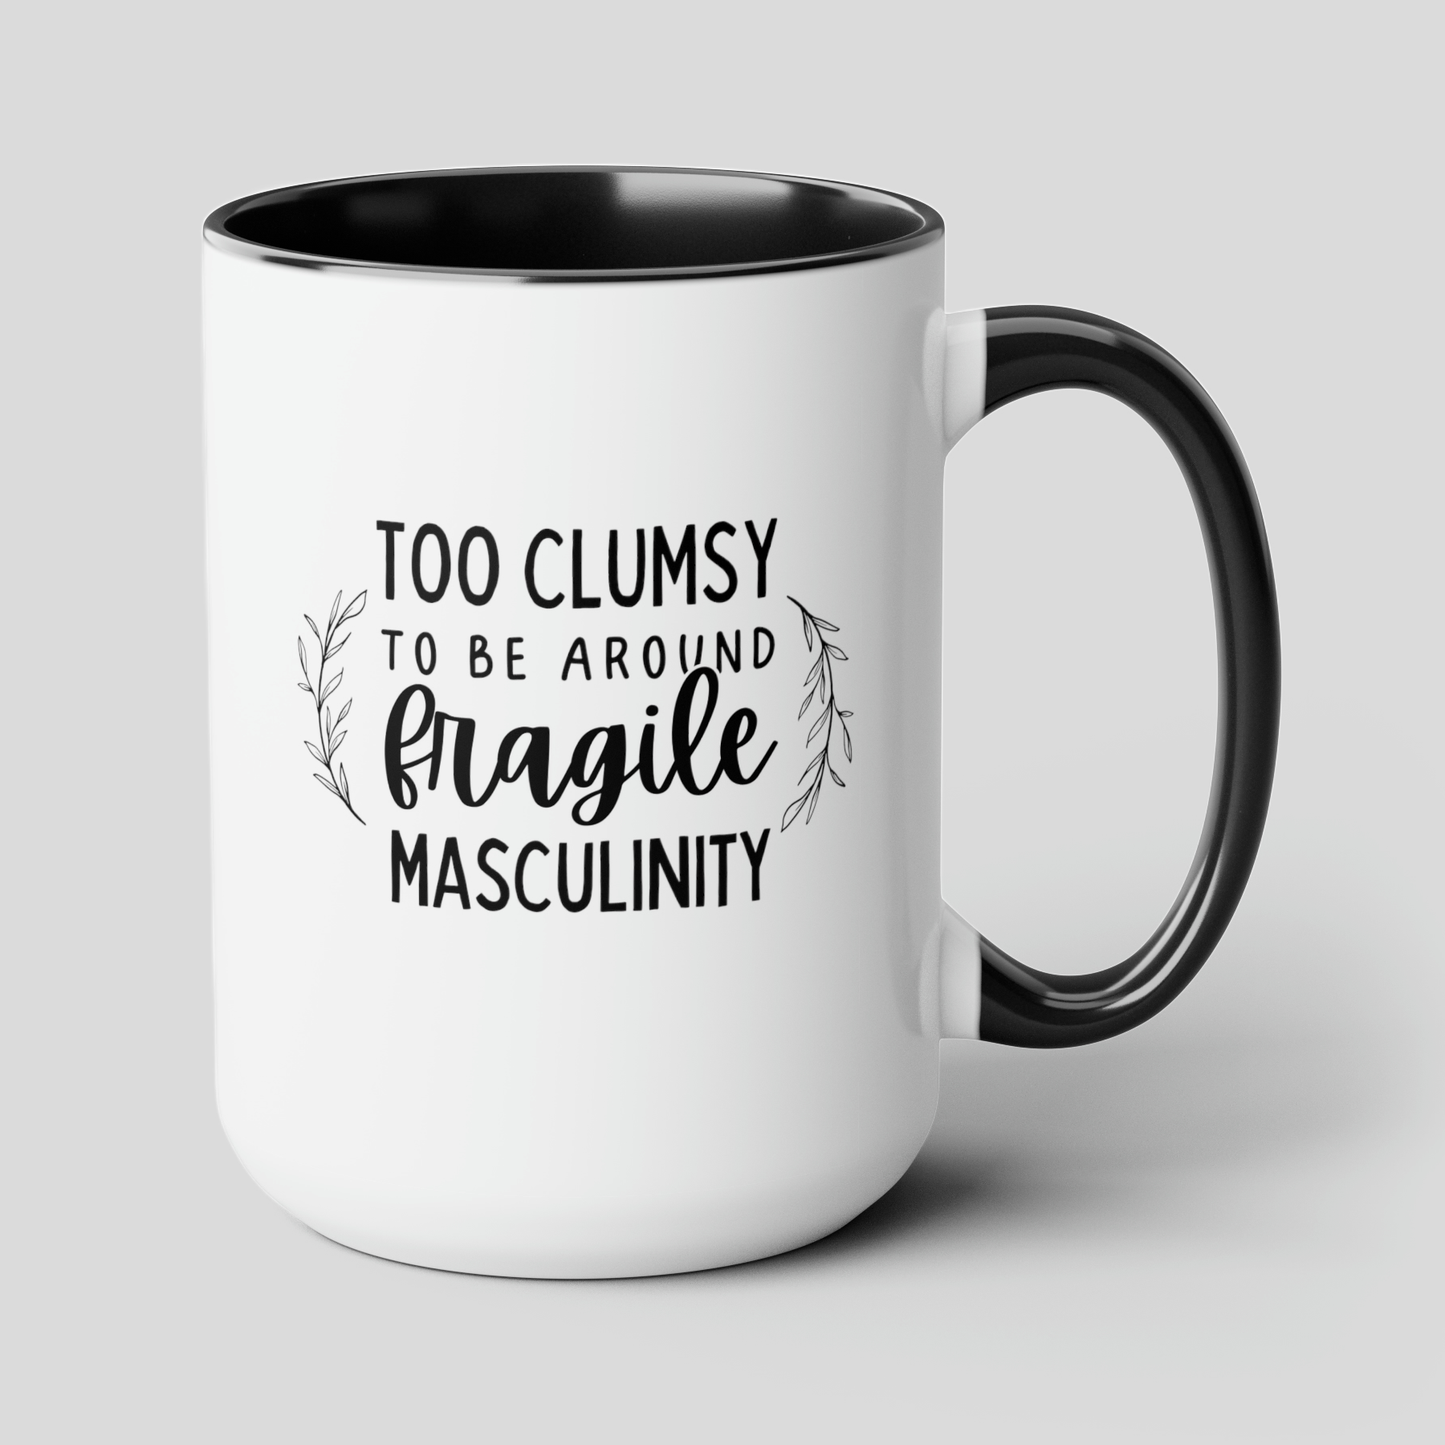 Too Clumsy to be Around Fragile Masculinity 15oz white with black accent funny large coffee mug gift for women feminist feminism waveywares wavey wares wavywares wavy wares cover